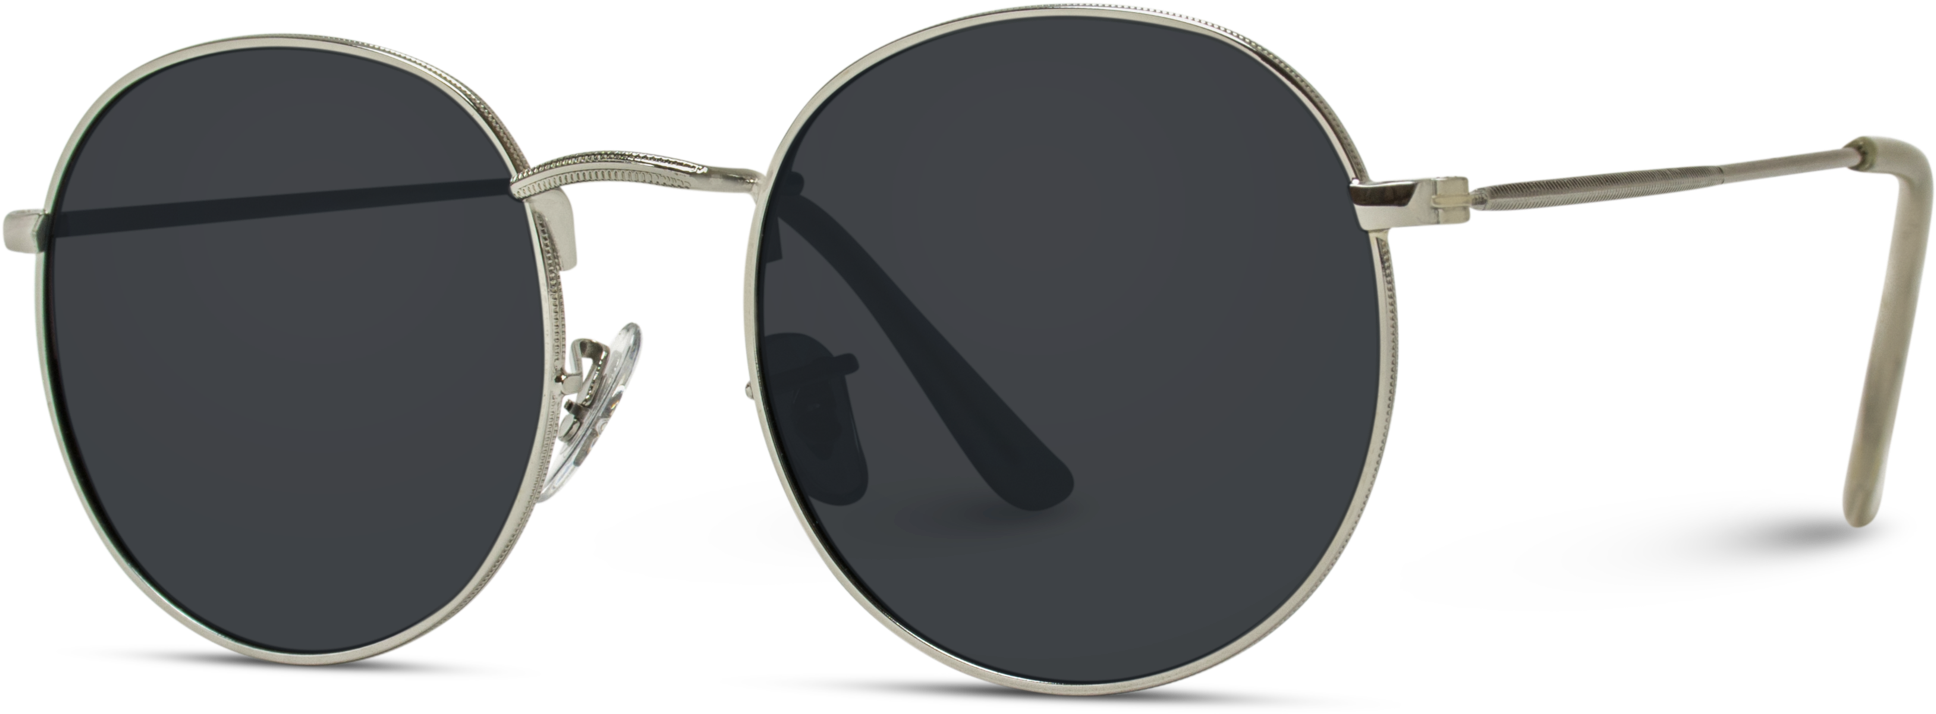 Retro Round Polarized Metal Frame Hipster Sunglasses - Ray Ban 3574n 001 71 (2048x2048), Png Download